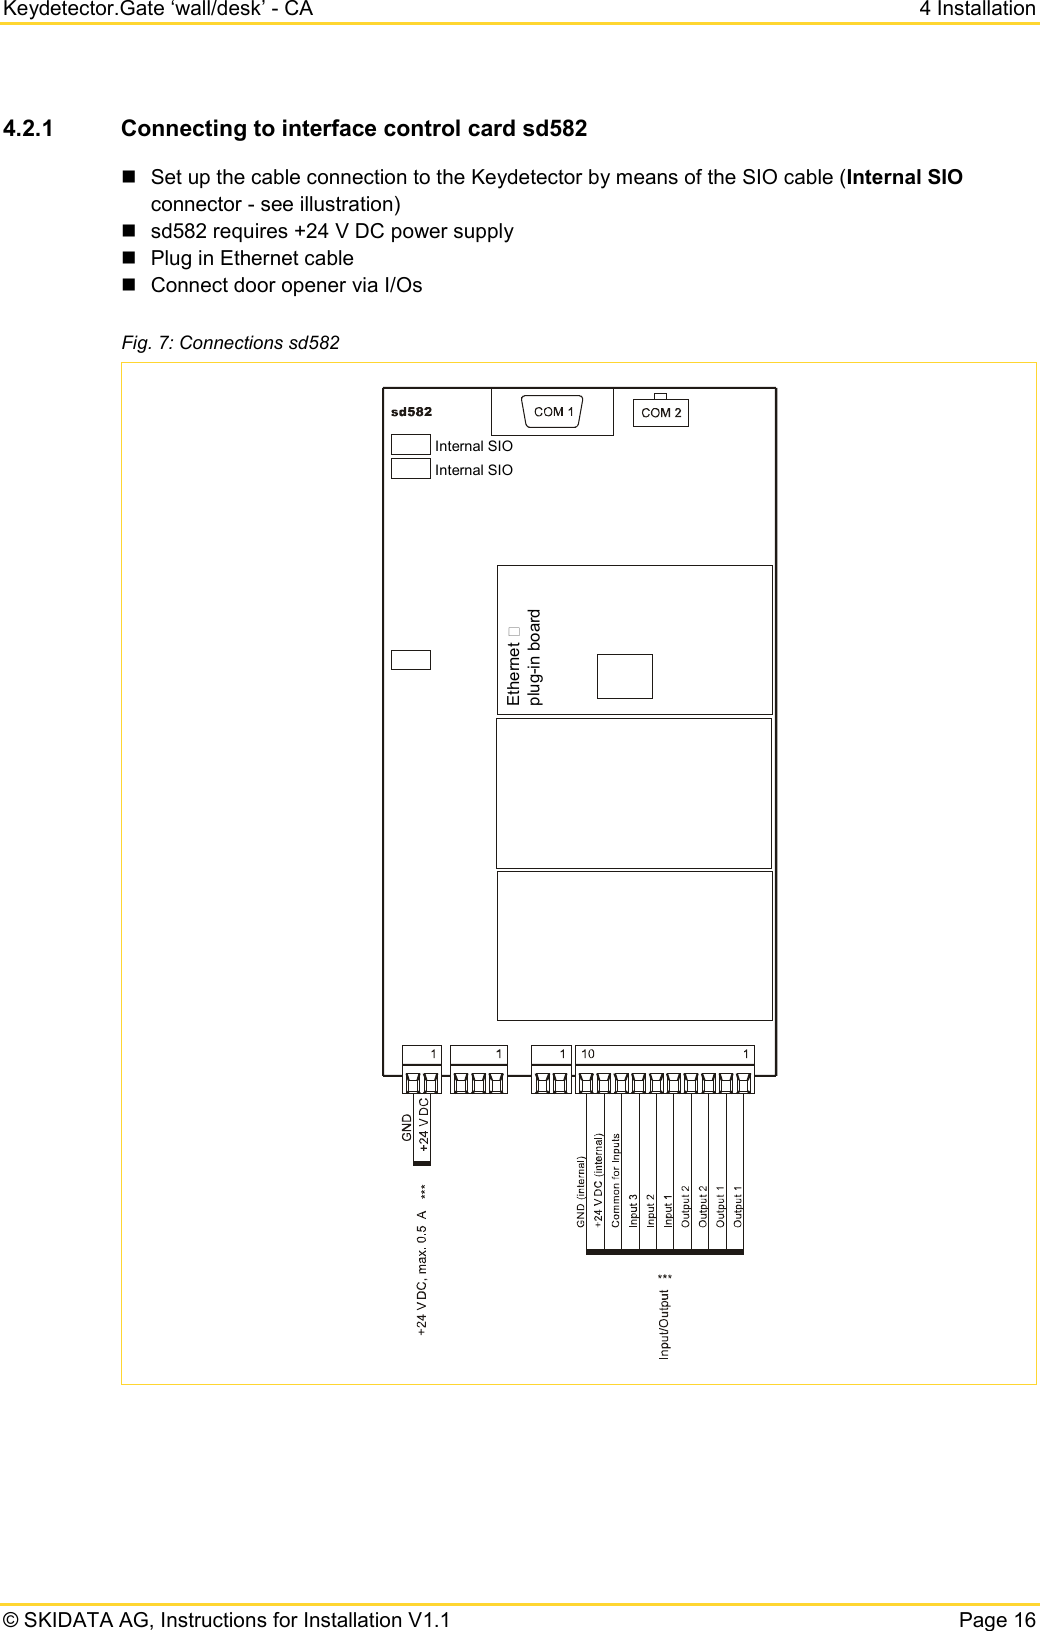 Keydetector.Gate ‘wall/desk’ - CA  4 Installation  © SKIDATA AG, Instructions for Installation V1.1   Page 16 4.2.1 Connecting to interface control card sd582  Set up the cable connection to the Keydetector by means of the SIO cable (Internal SIO connector - see illustration)   sd582 requires +24 V DC power supply  Plug in Ethernet cable  Connect door opener via I/Os Fig. 7: Connections sd582     Ethernet plug-in boardInternal SIOInternal SIO